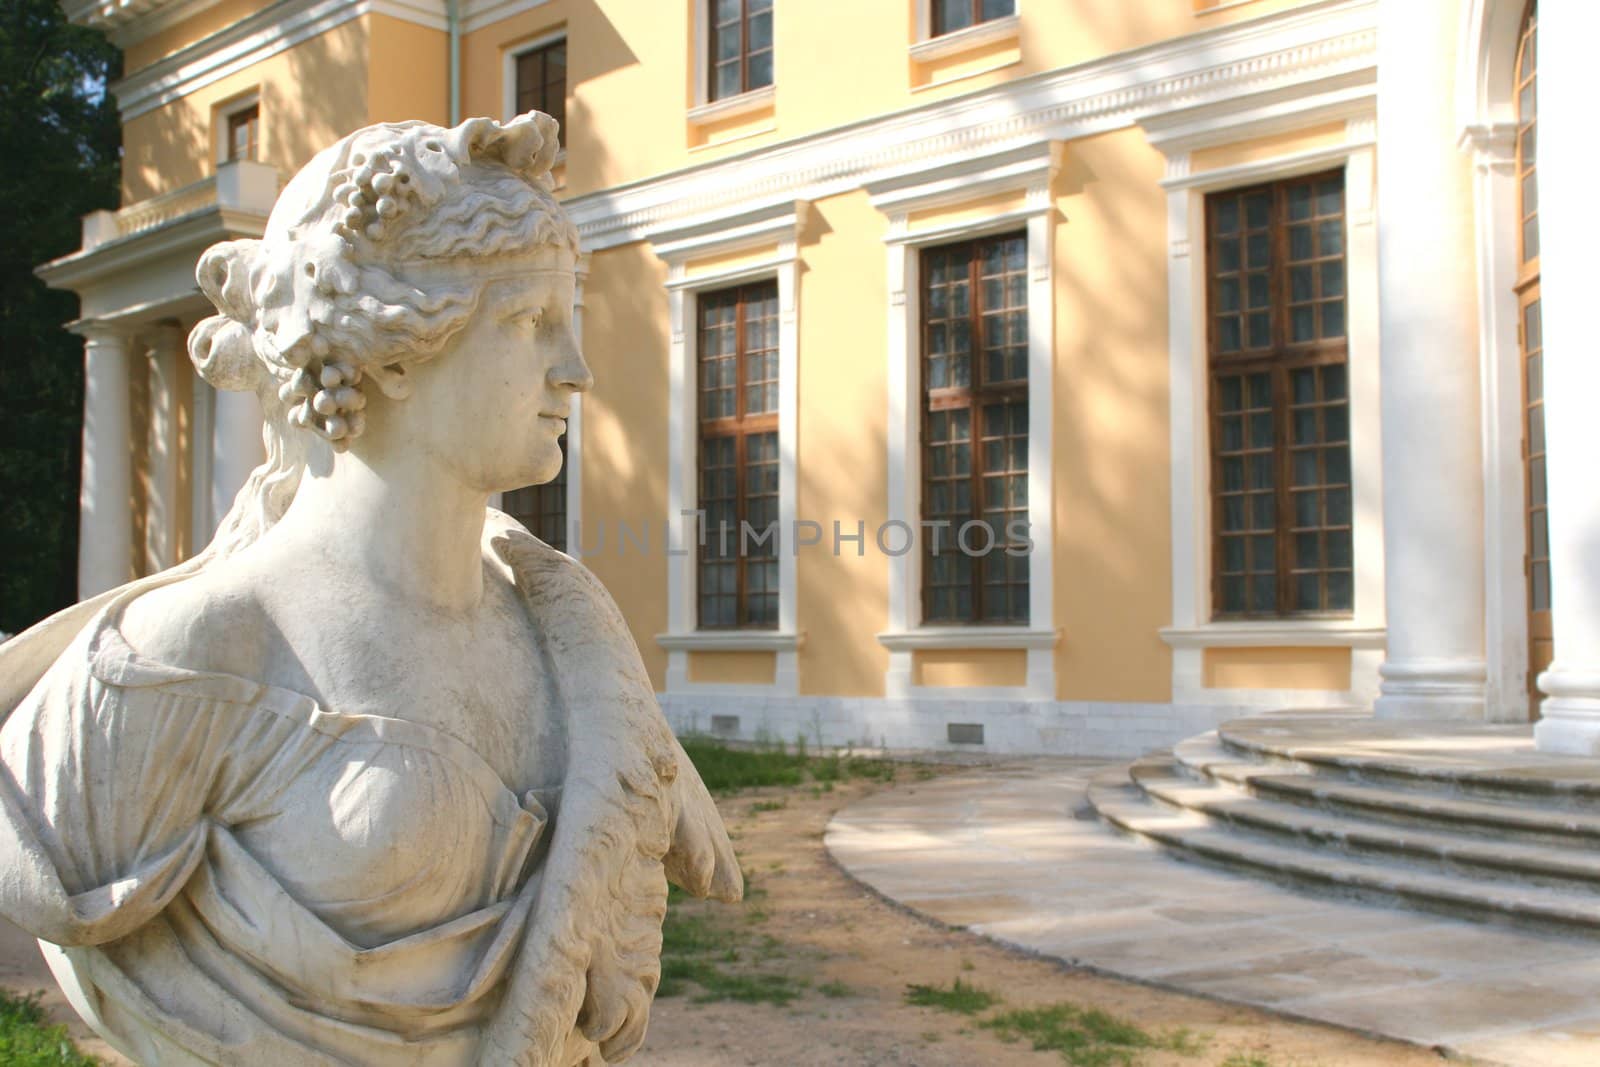 Fragment of the Antique Sculpture, Feminine Figure on Background of the Building with Pillar